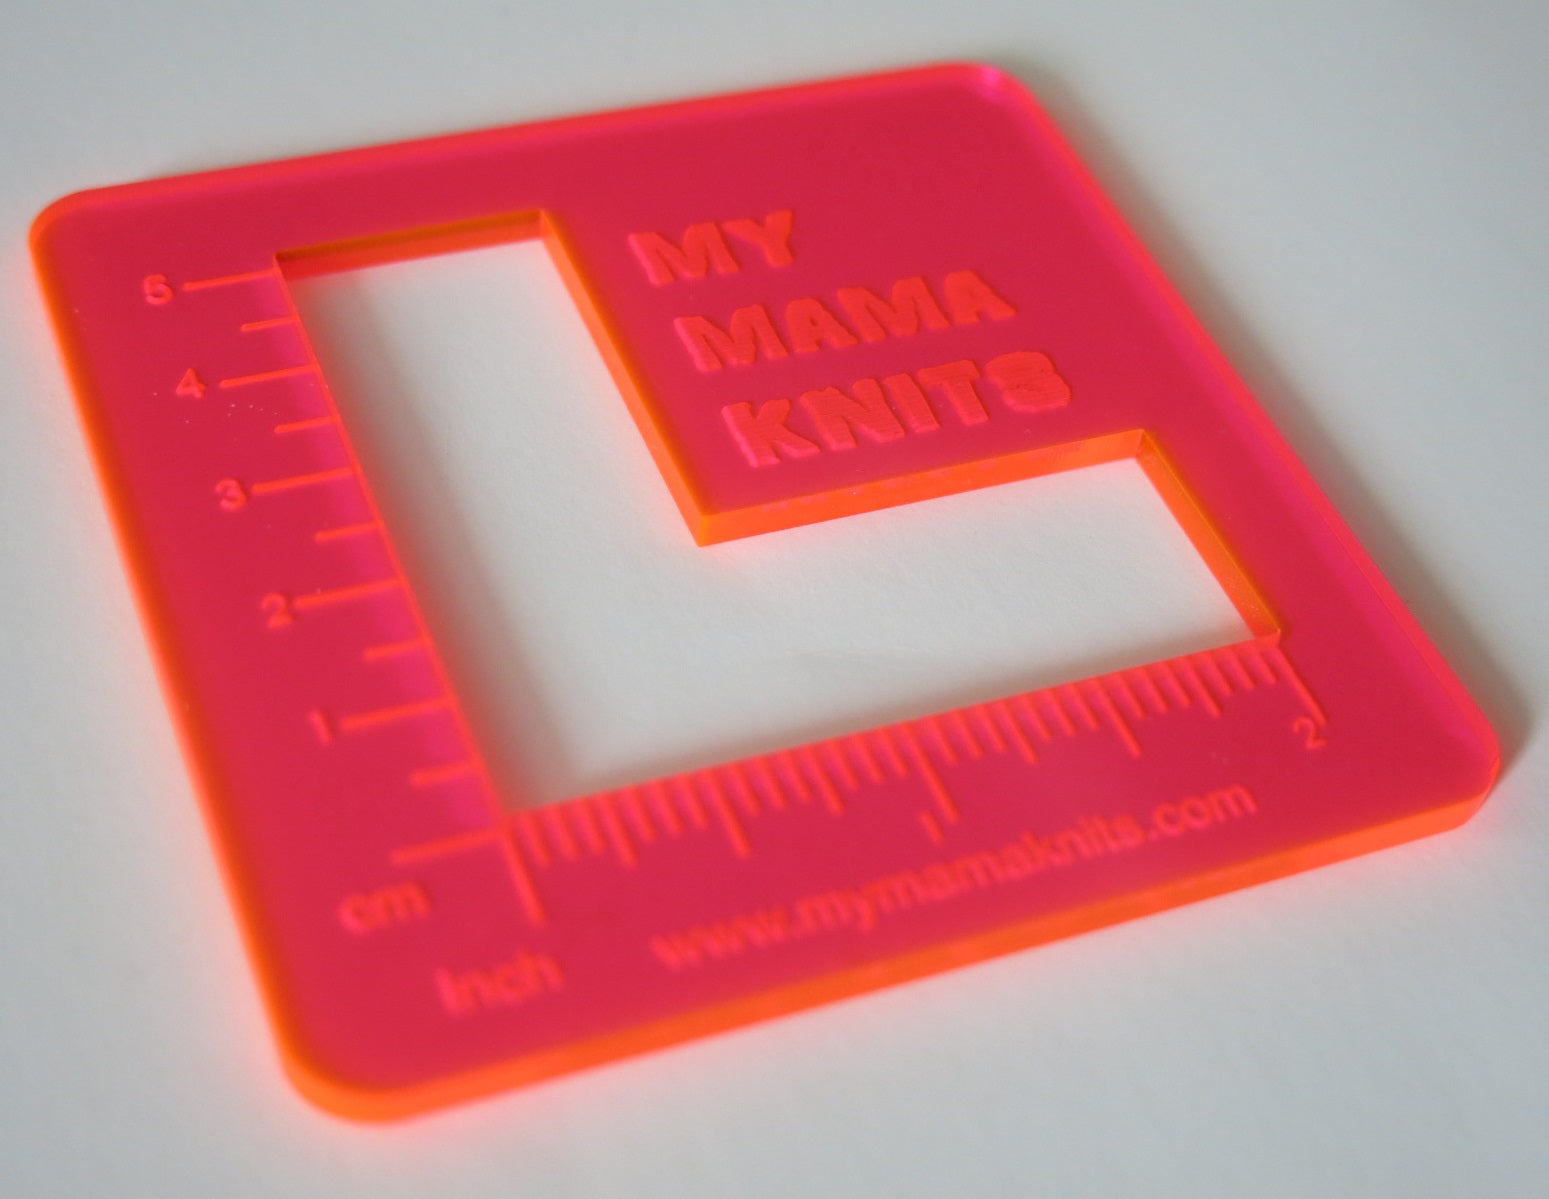 katrinkles acrylic swatch rulers in neon pink orange for knitting and crochet